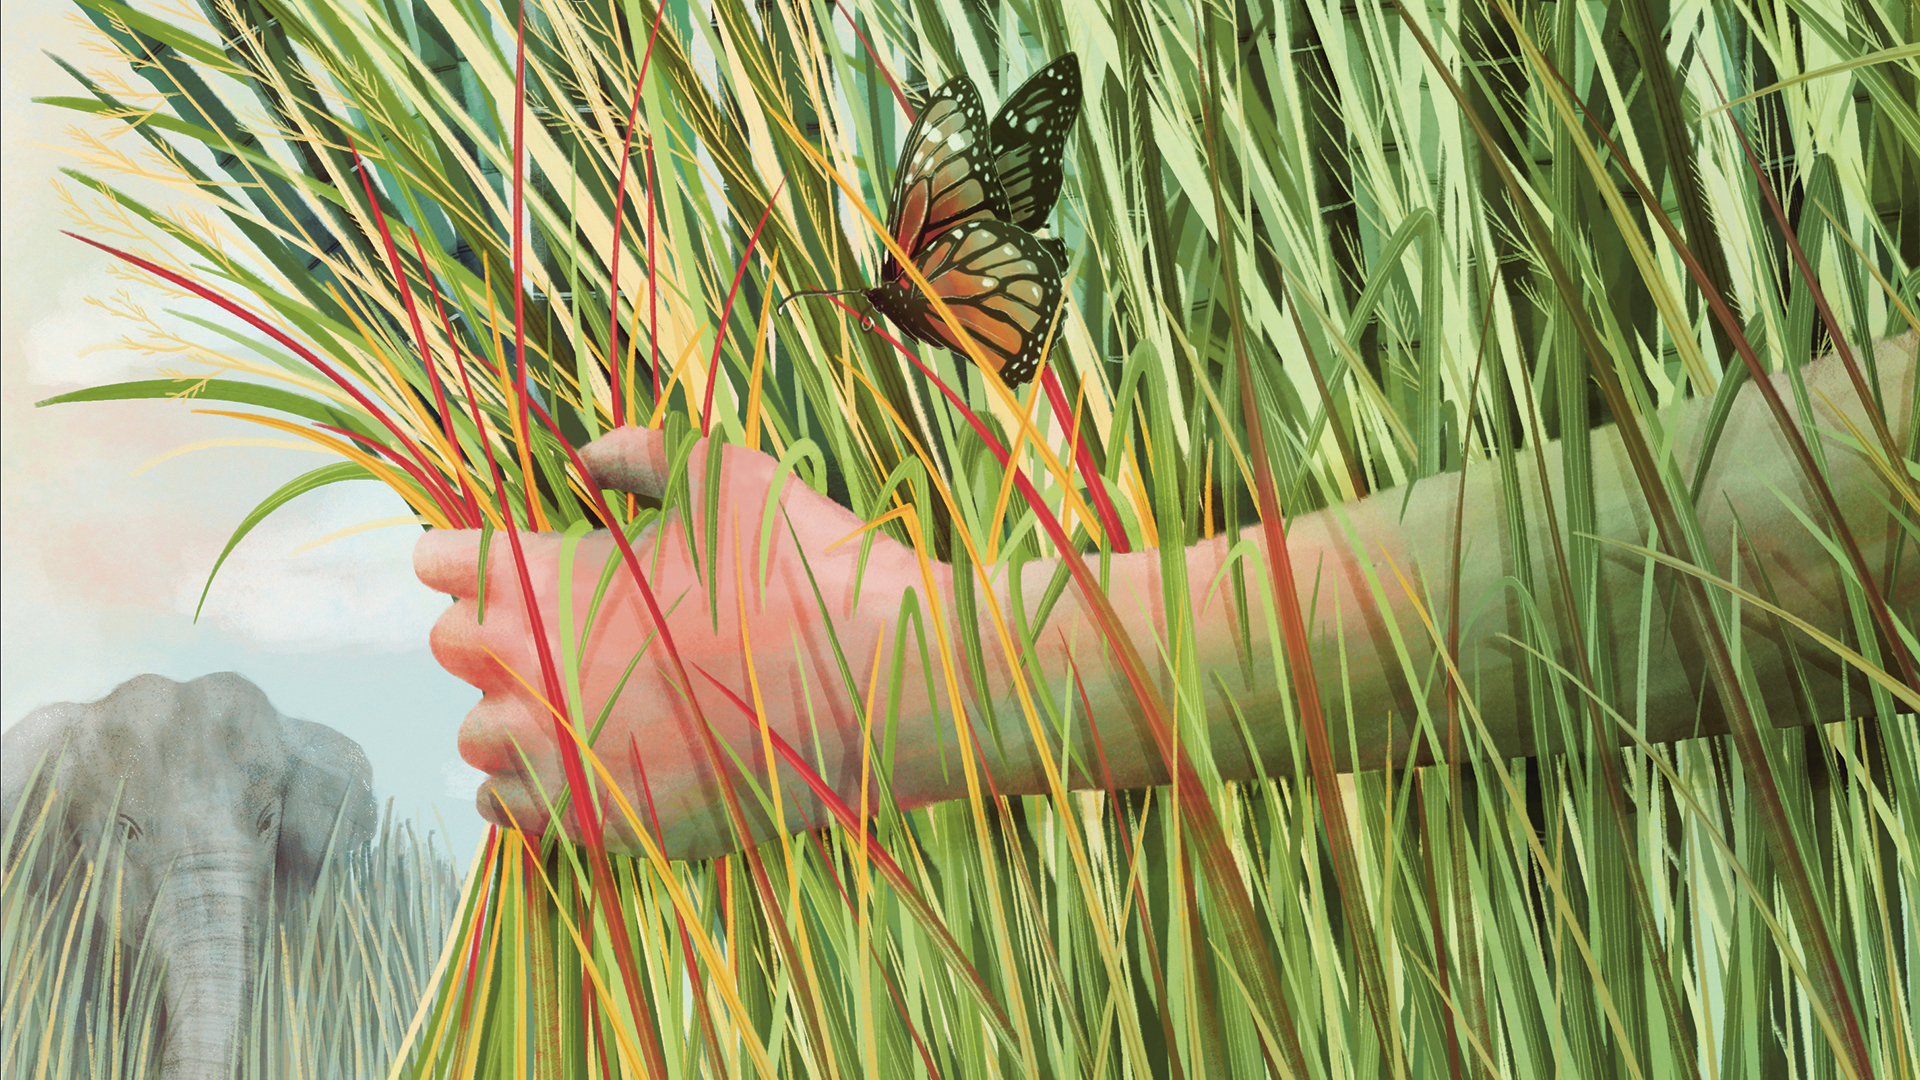 A hand grasping some grasses